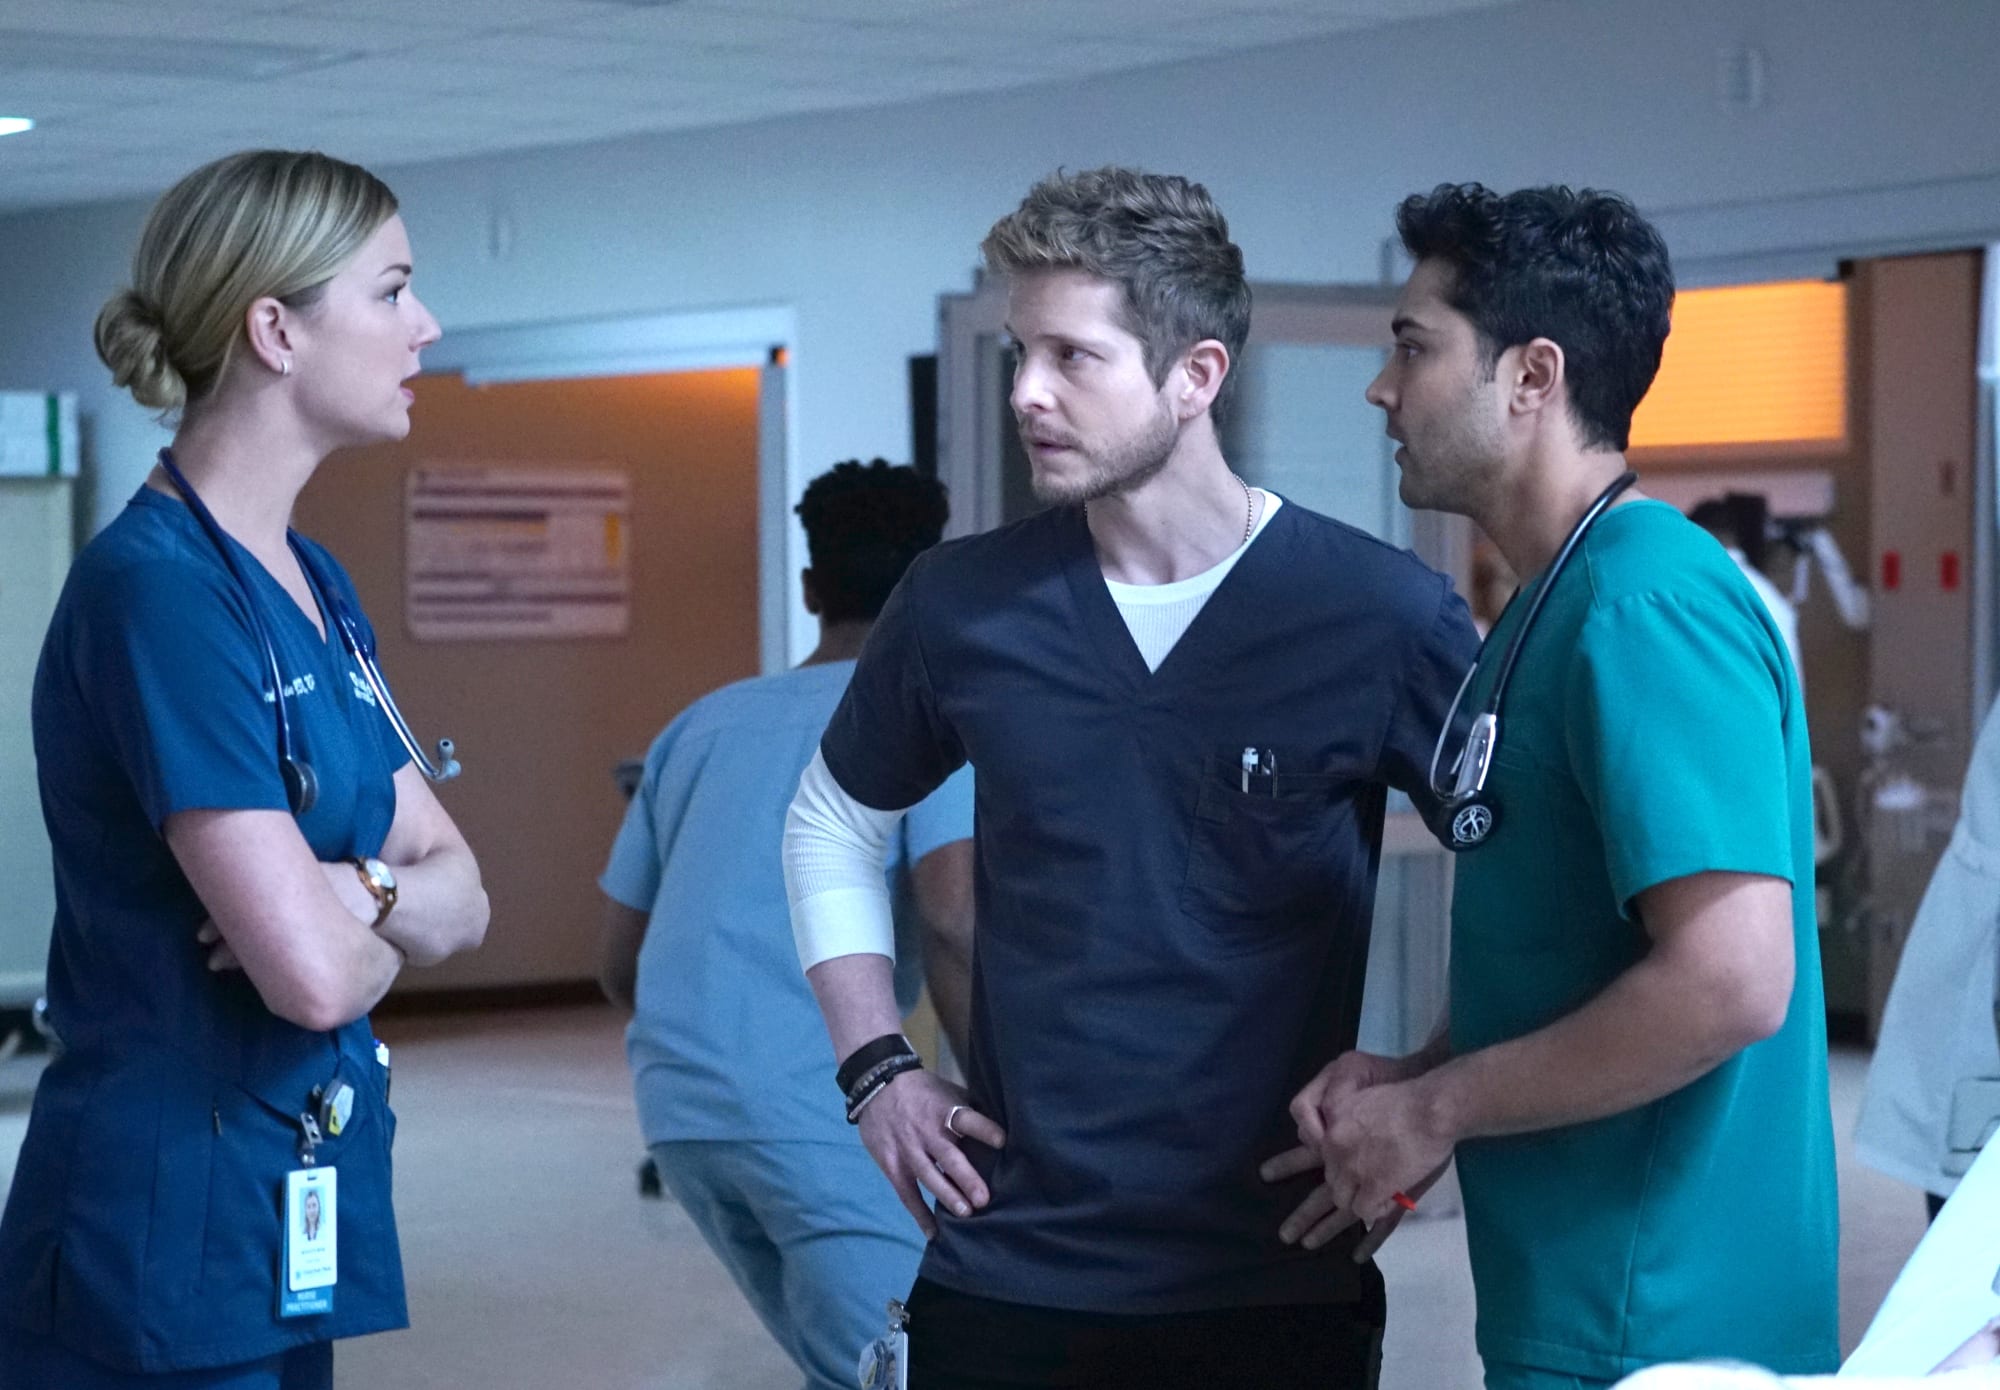 How to watch The Resident Season 2 premiere live online